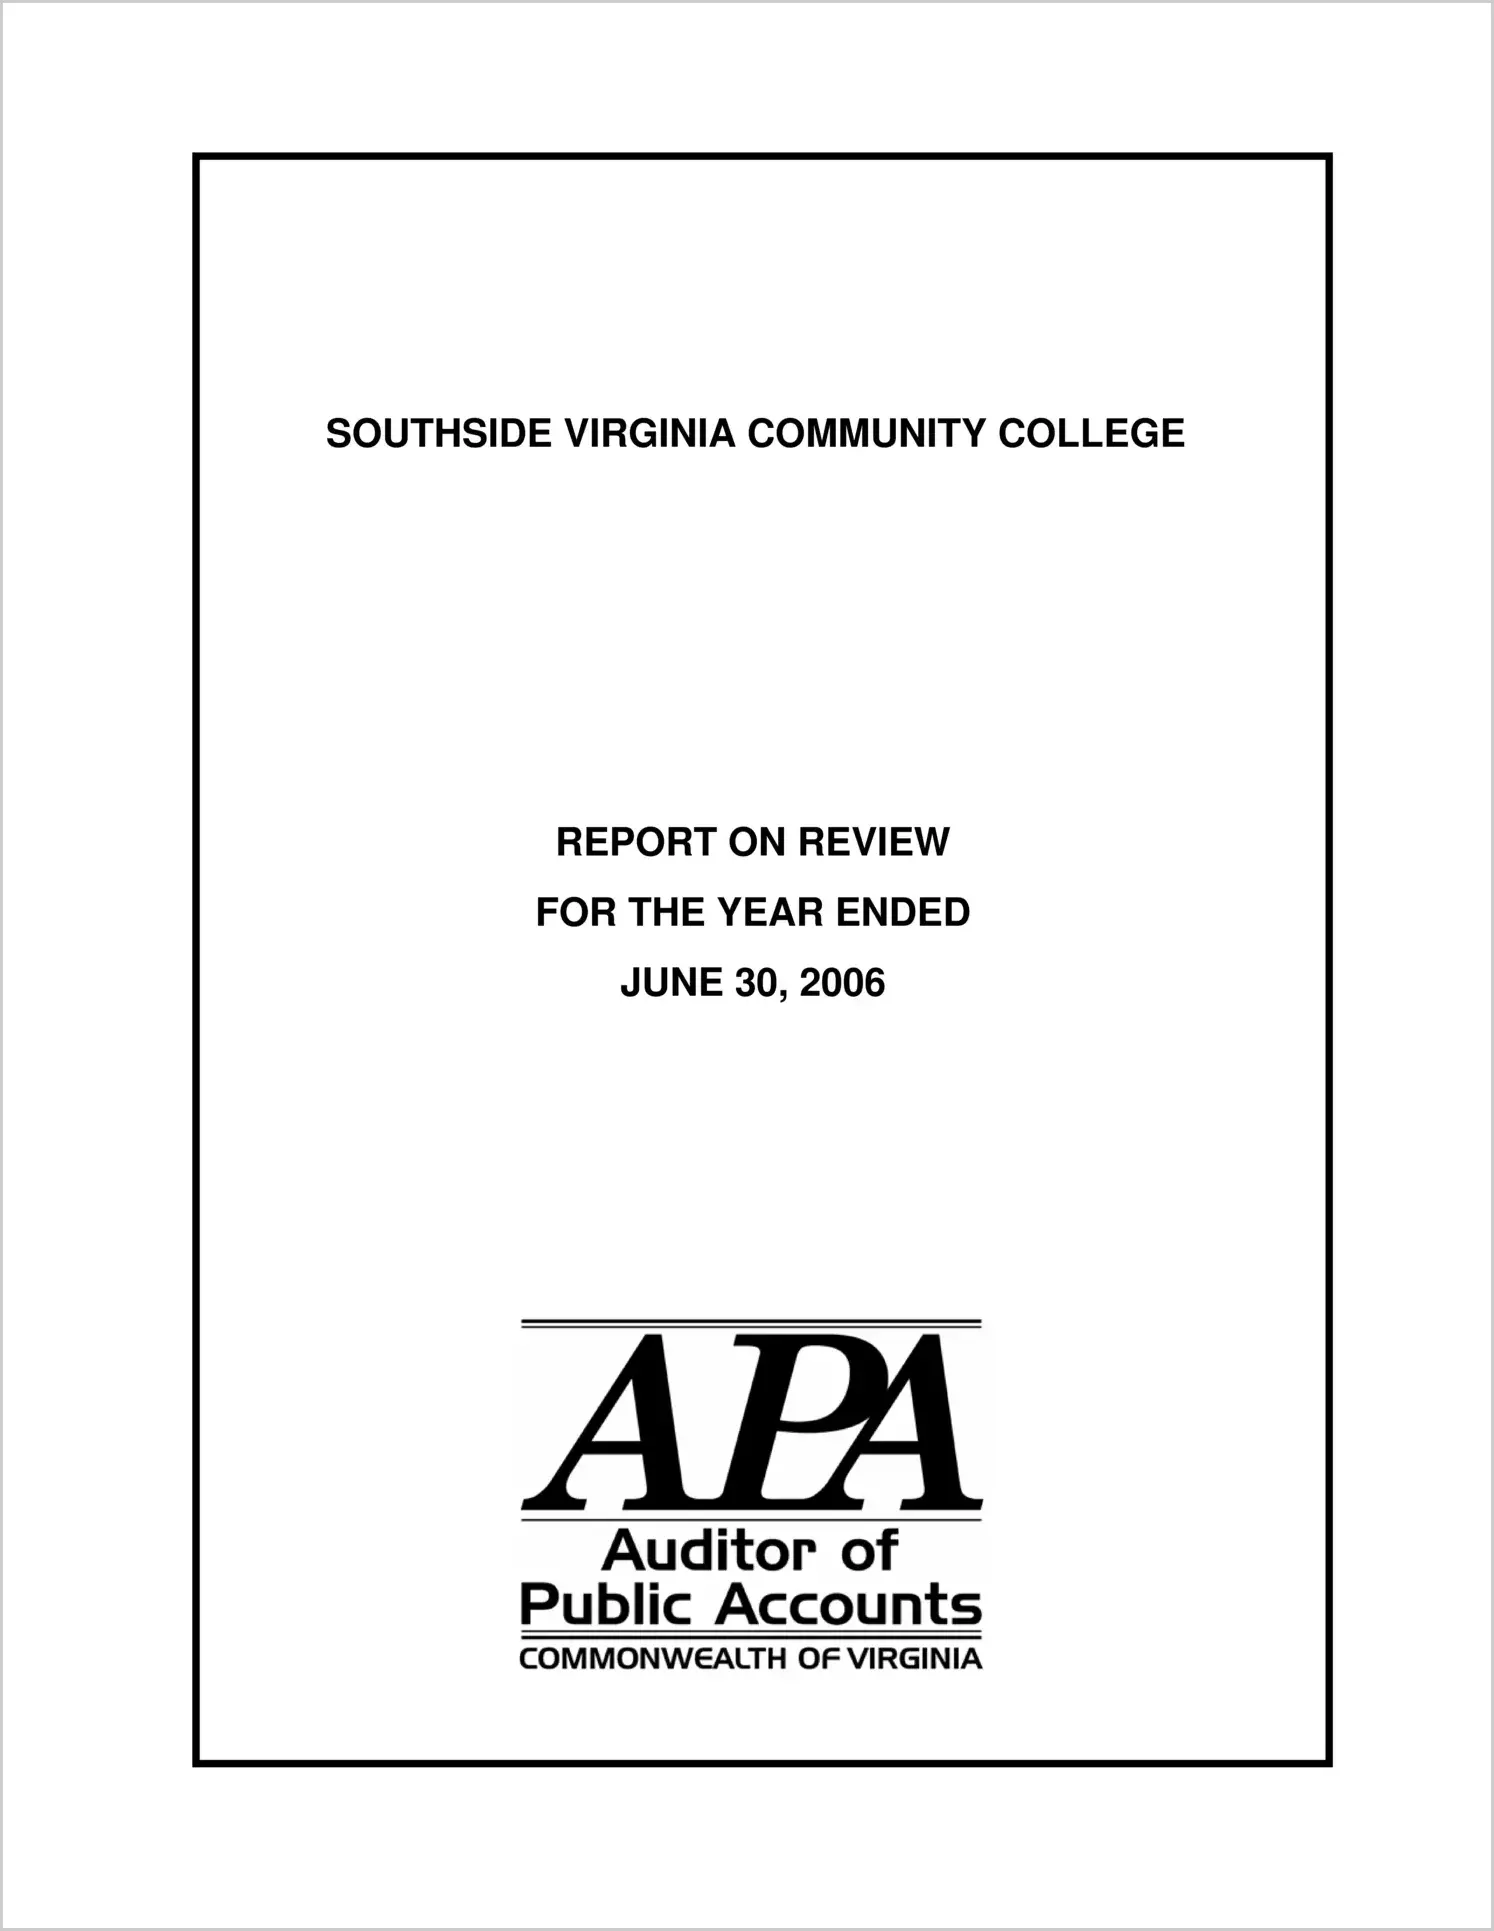 Southside Virginia Community College Report on review for the year ended June 30, 2006